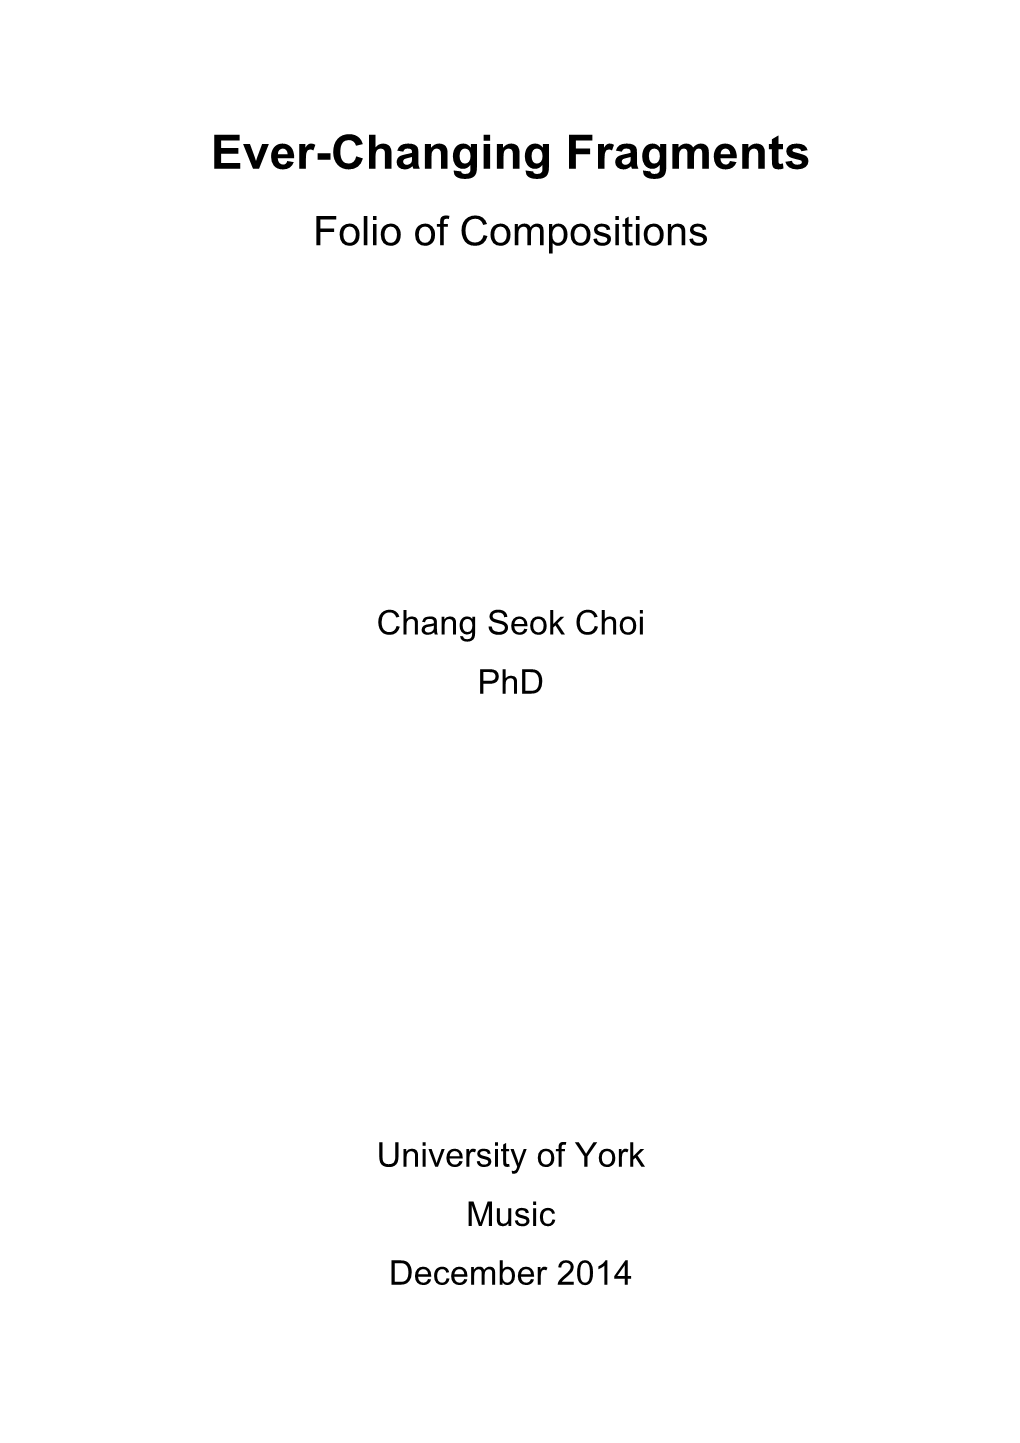 Ever-Changing Fragments Folio of Compositions